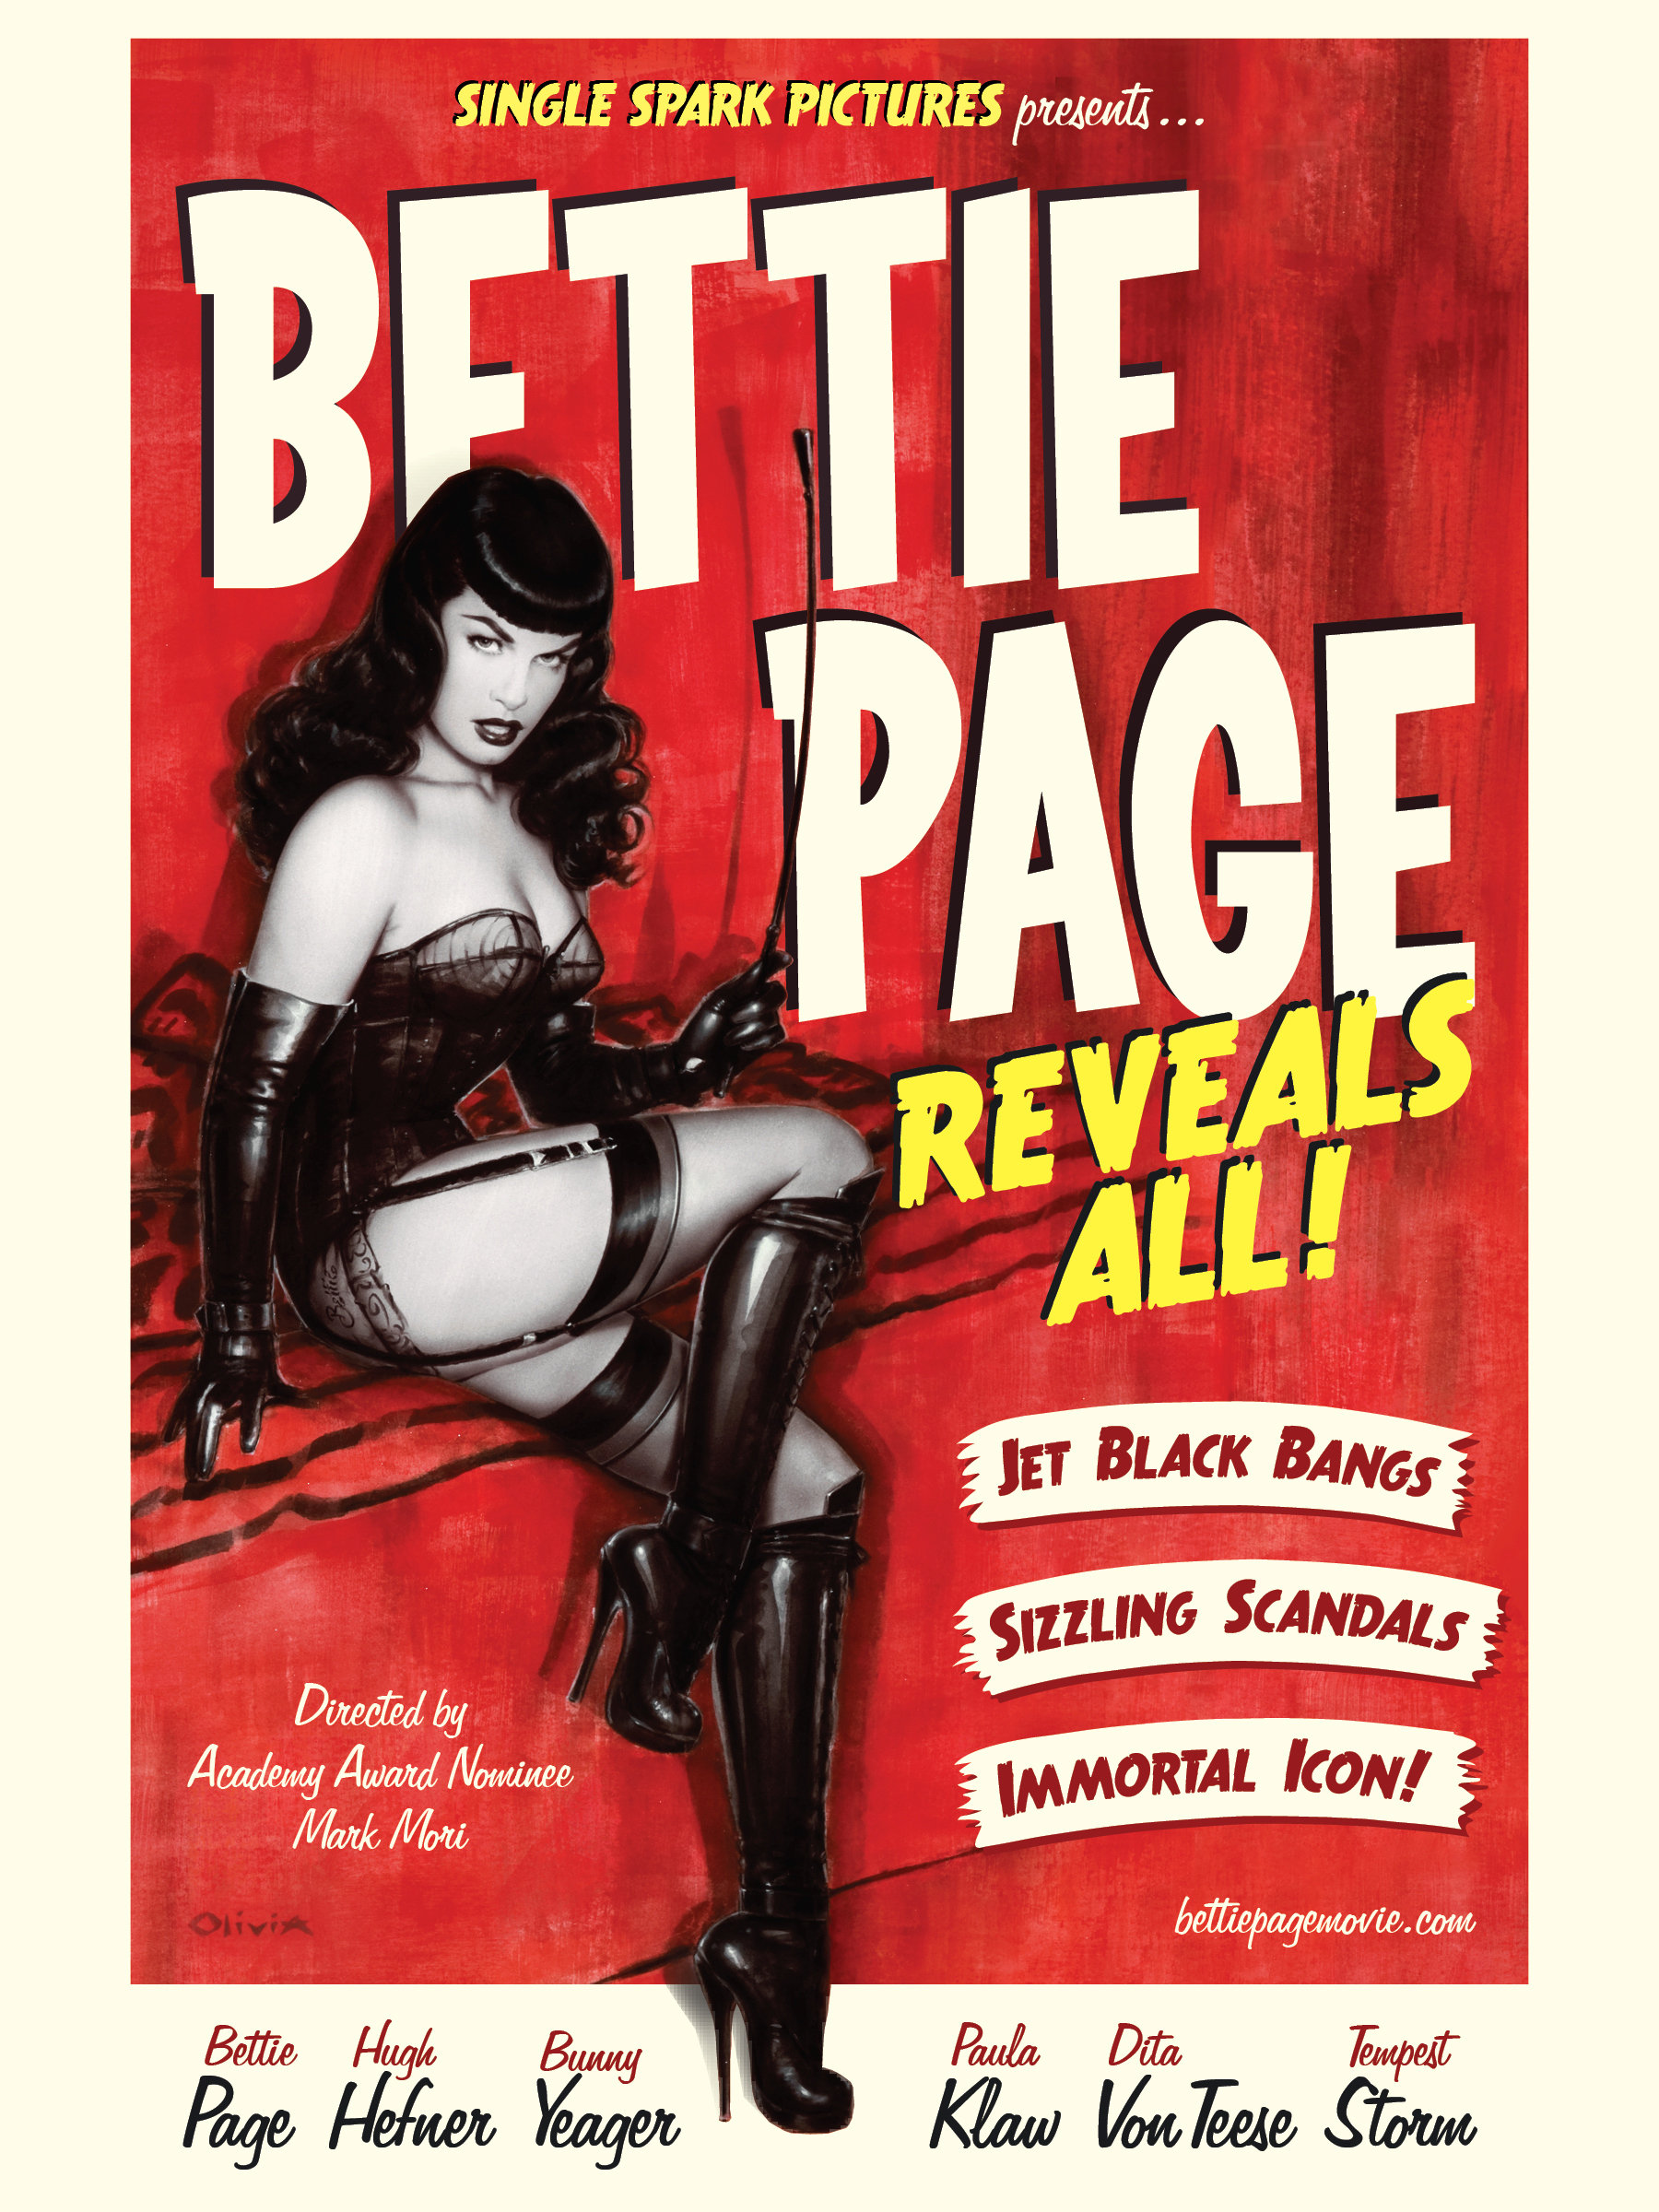 amila gunathilaka recommends Bettie Page Images